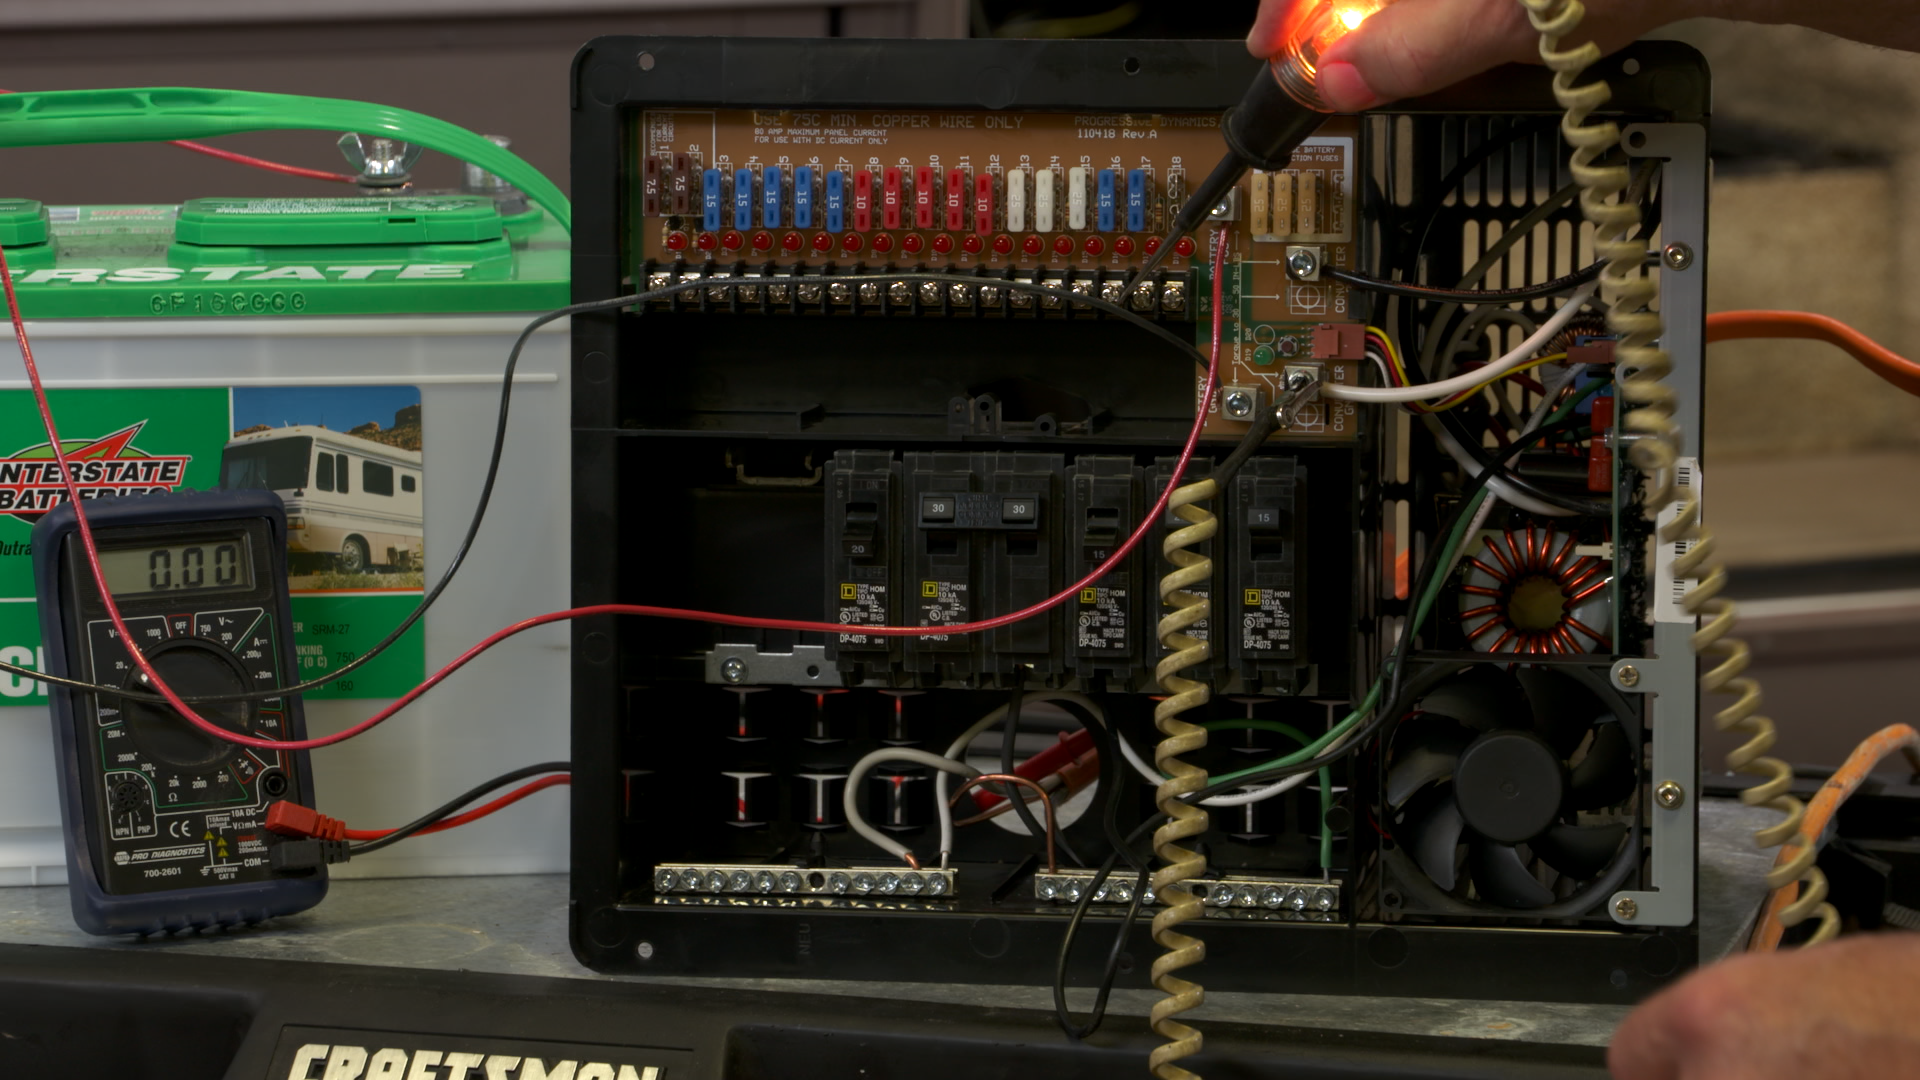 Session 2: How the 12-Volt System Works